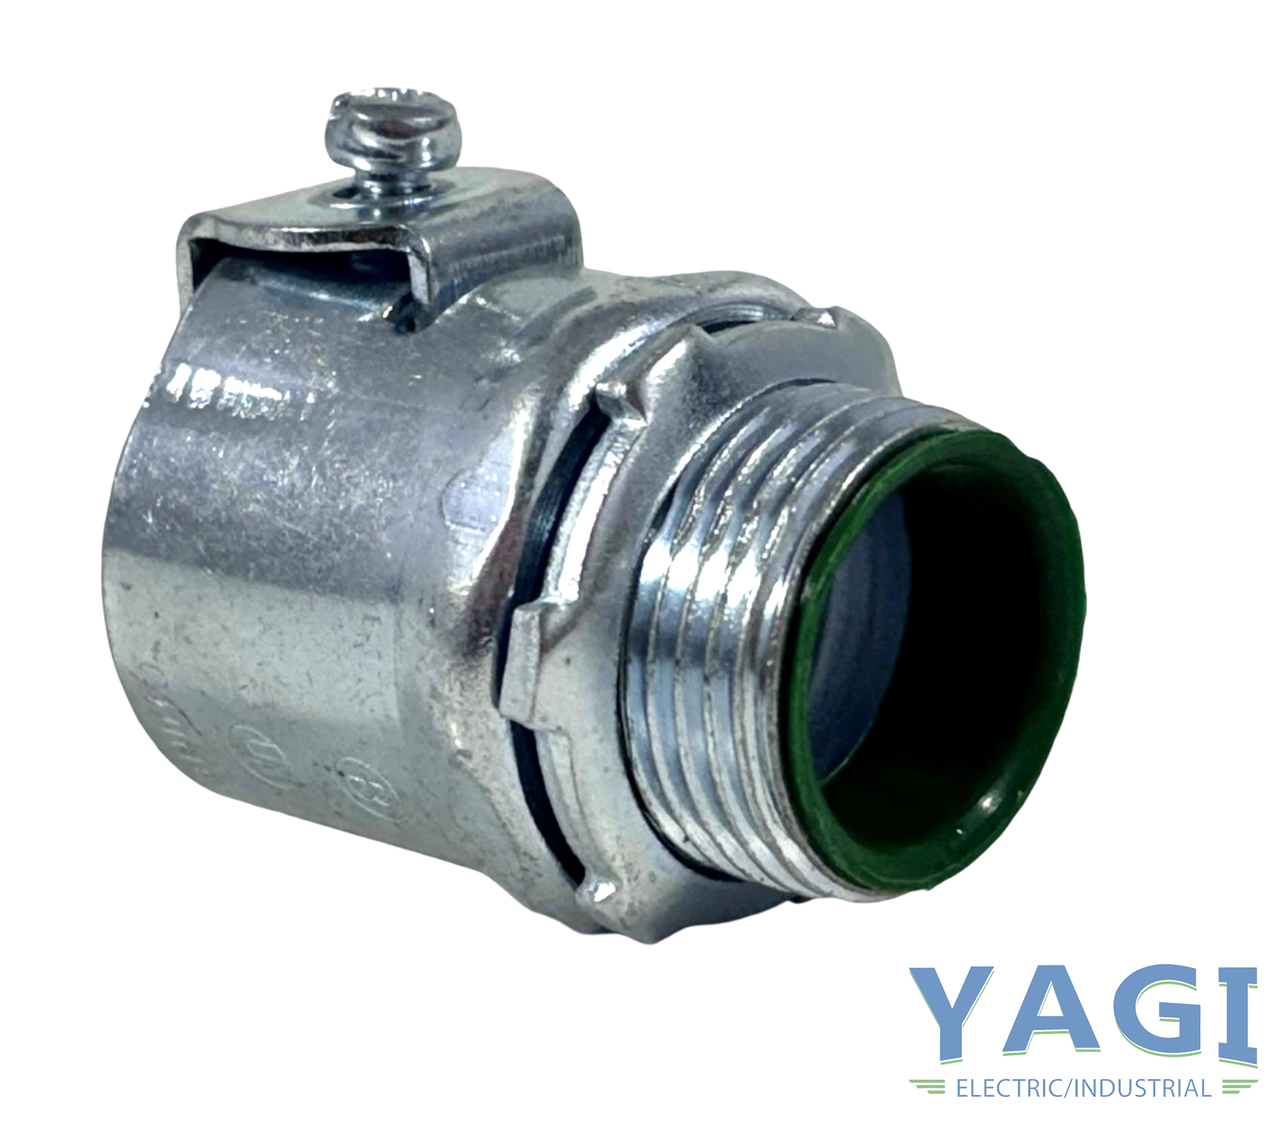 YAGI 572-SI Mc/FMC Insulated Connector Material: Zinc Plated Steel Size: 3/4-Inch U Shaped Strap Connector